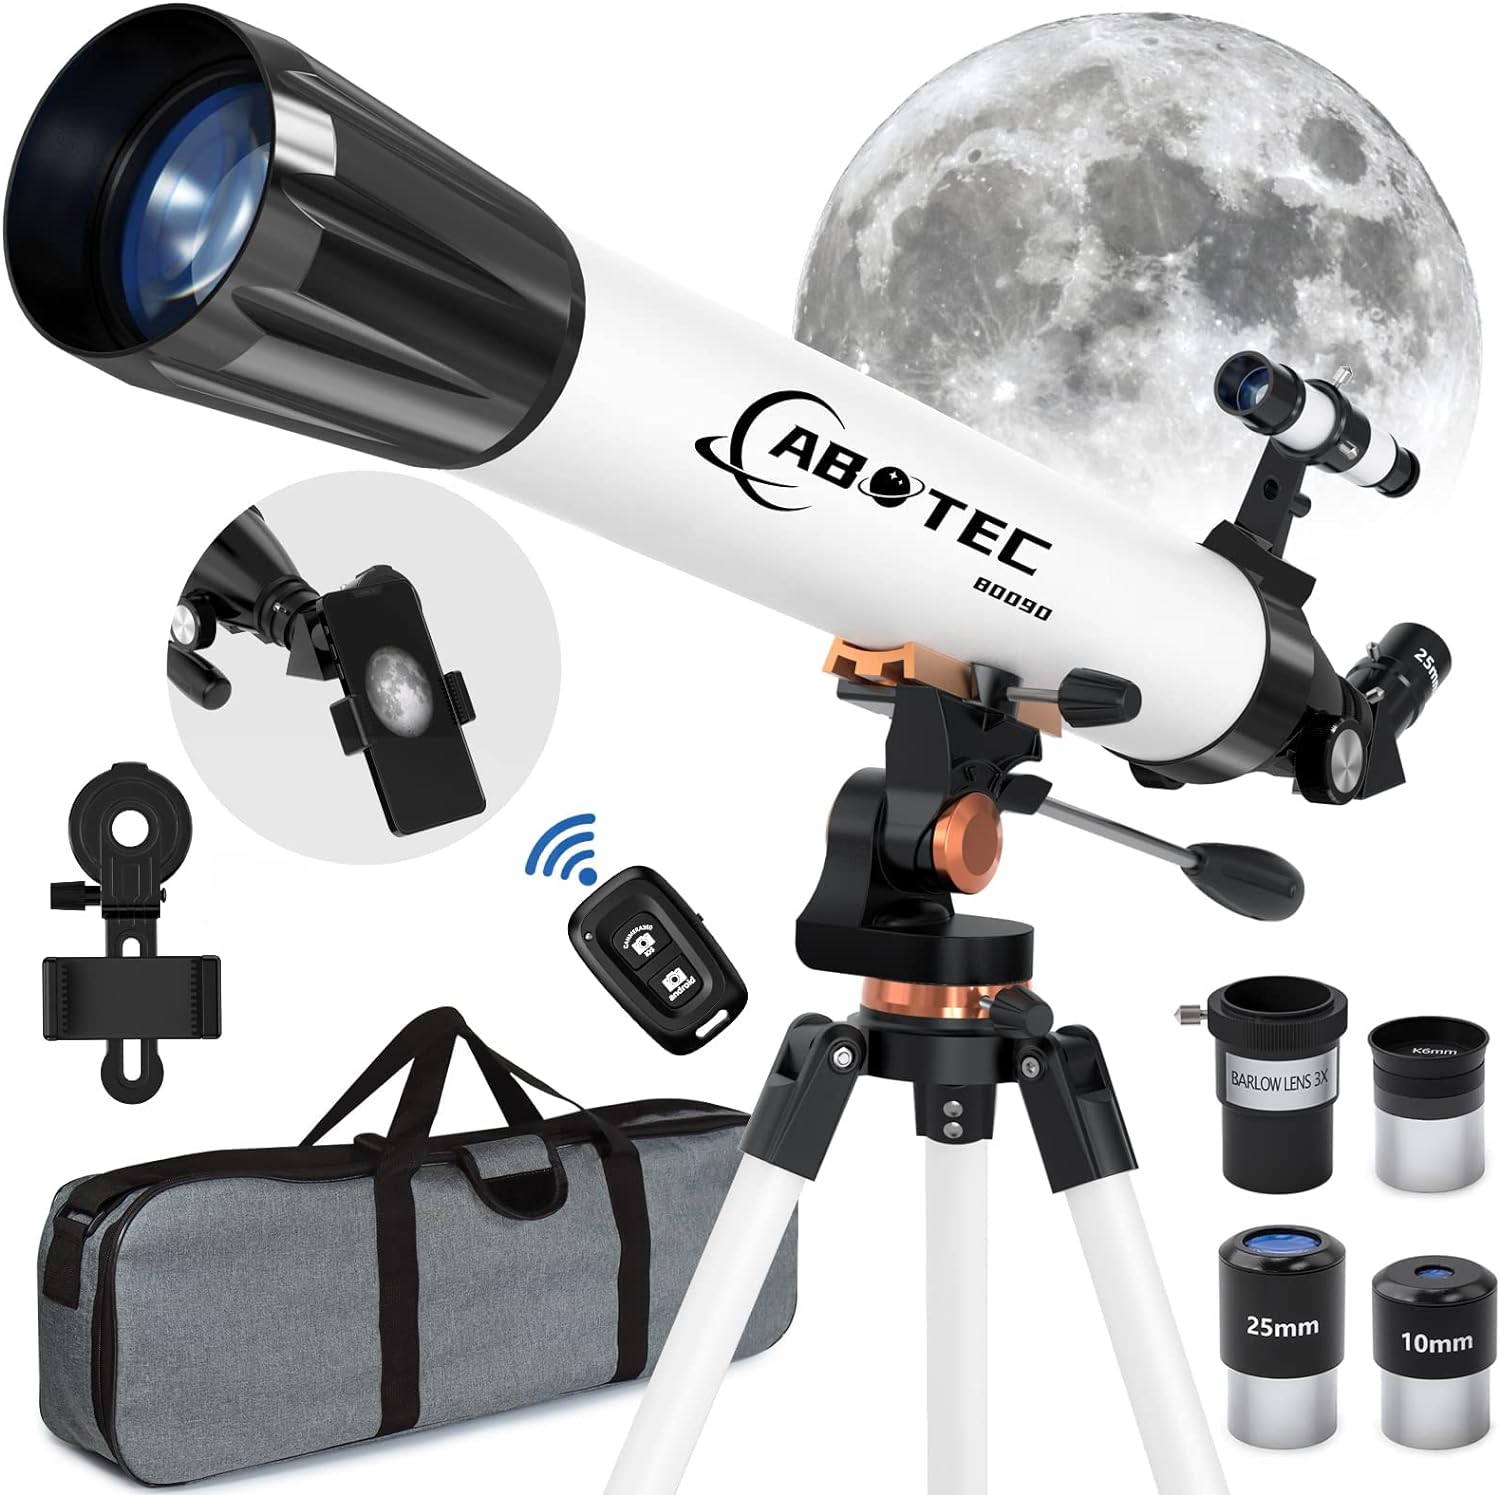 ABOTEC Telescope for Adults Astronomy, 90mm Aperture 800mm Refractor Telescopes for Kids Beginners, (32X-400X) Multi-Coated High Transmission Telescope with Carry Bag Phone Mount Wireless Control